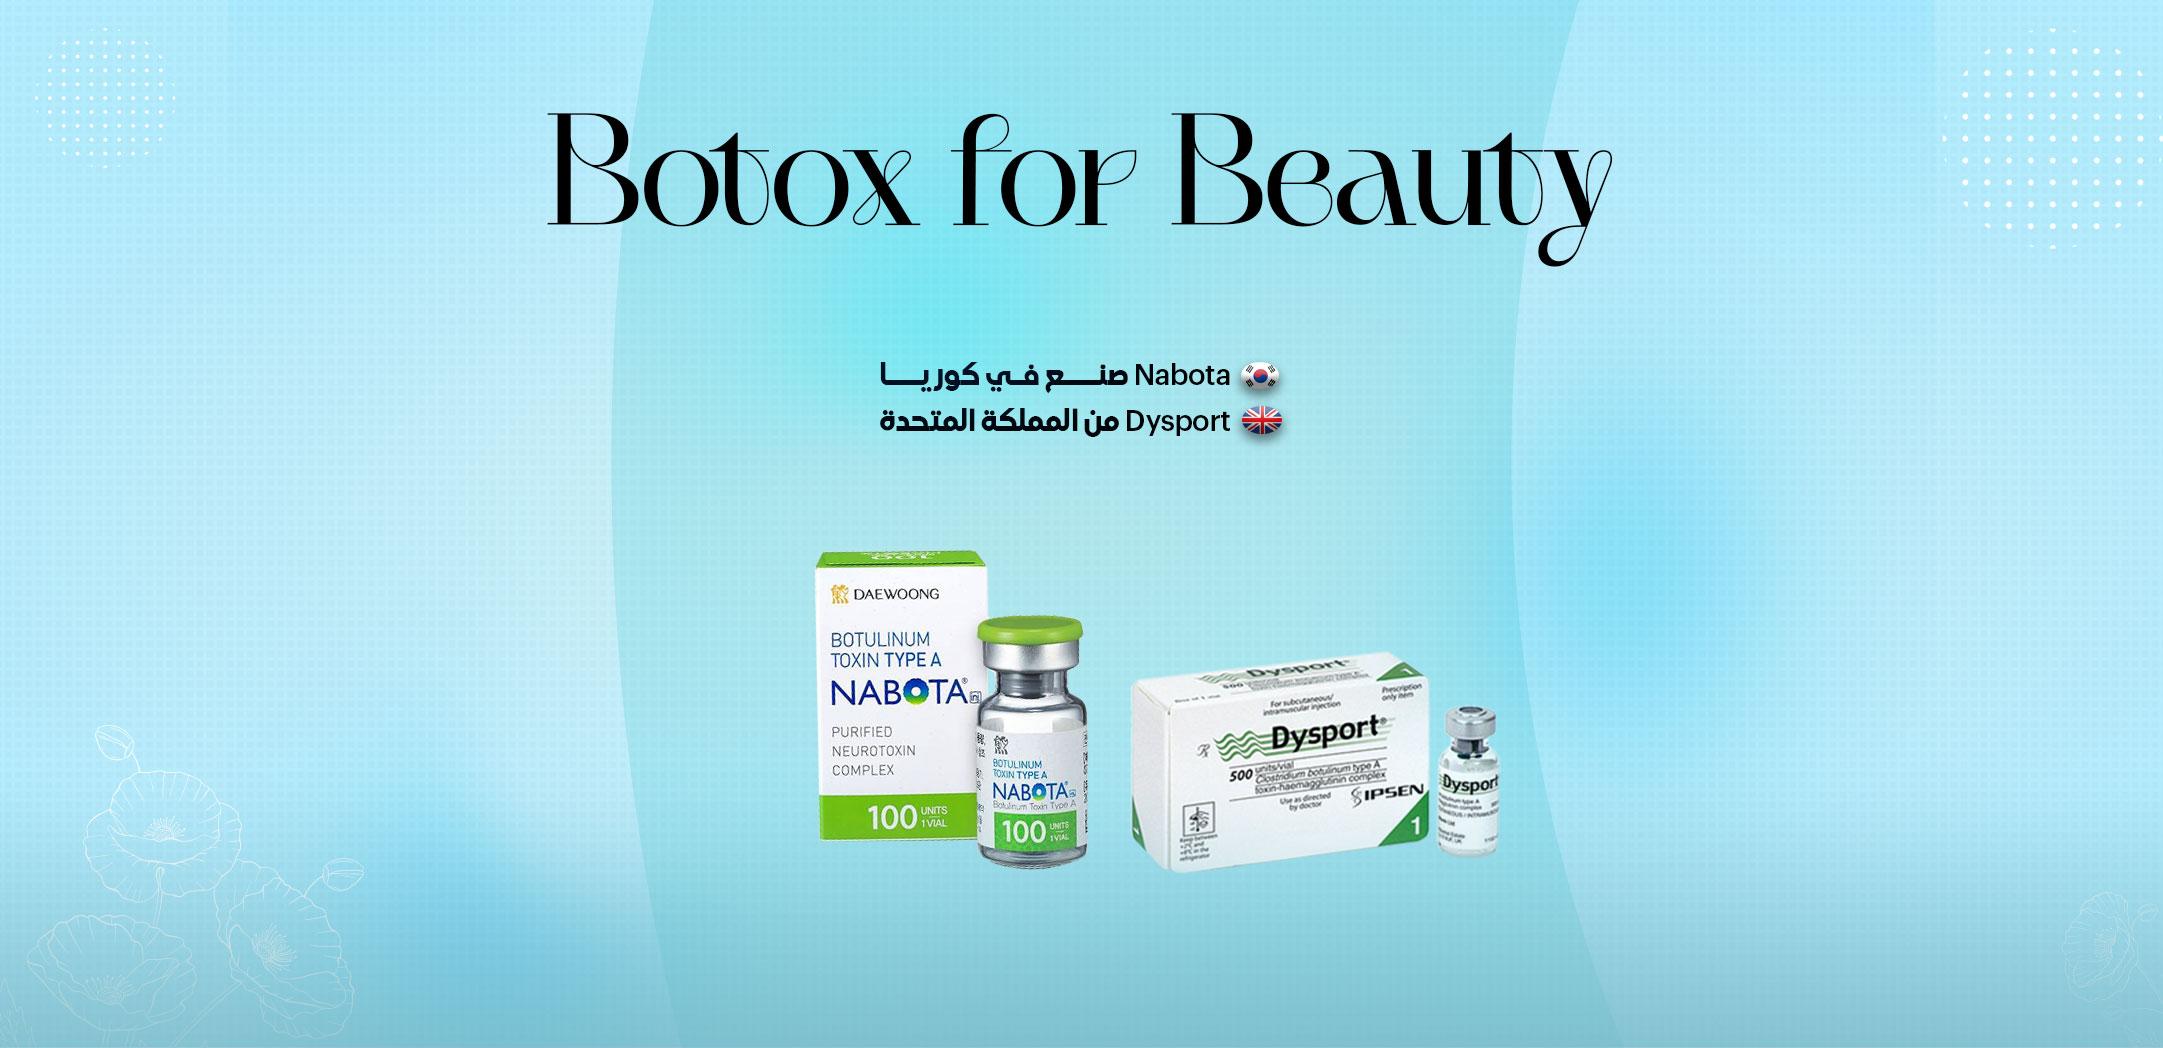 Botox for beauty